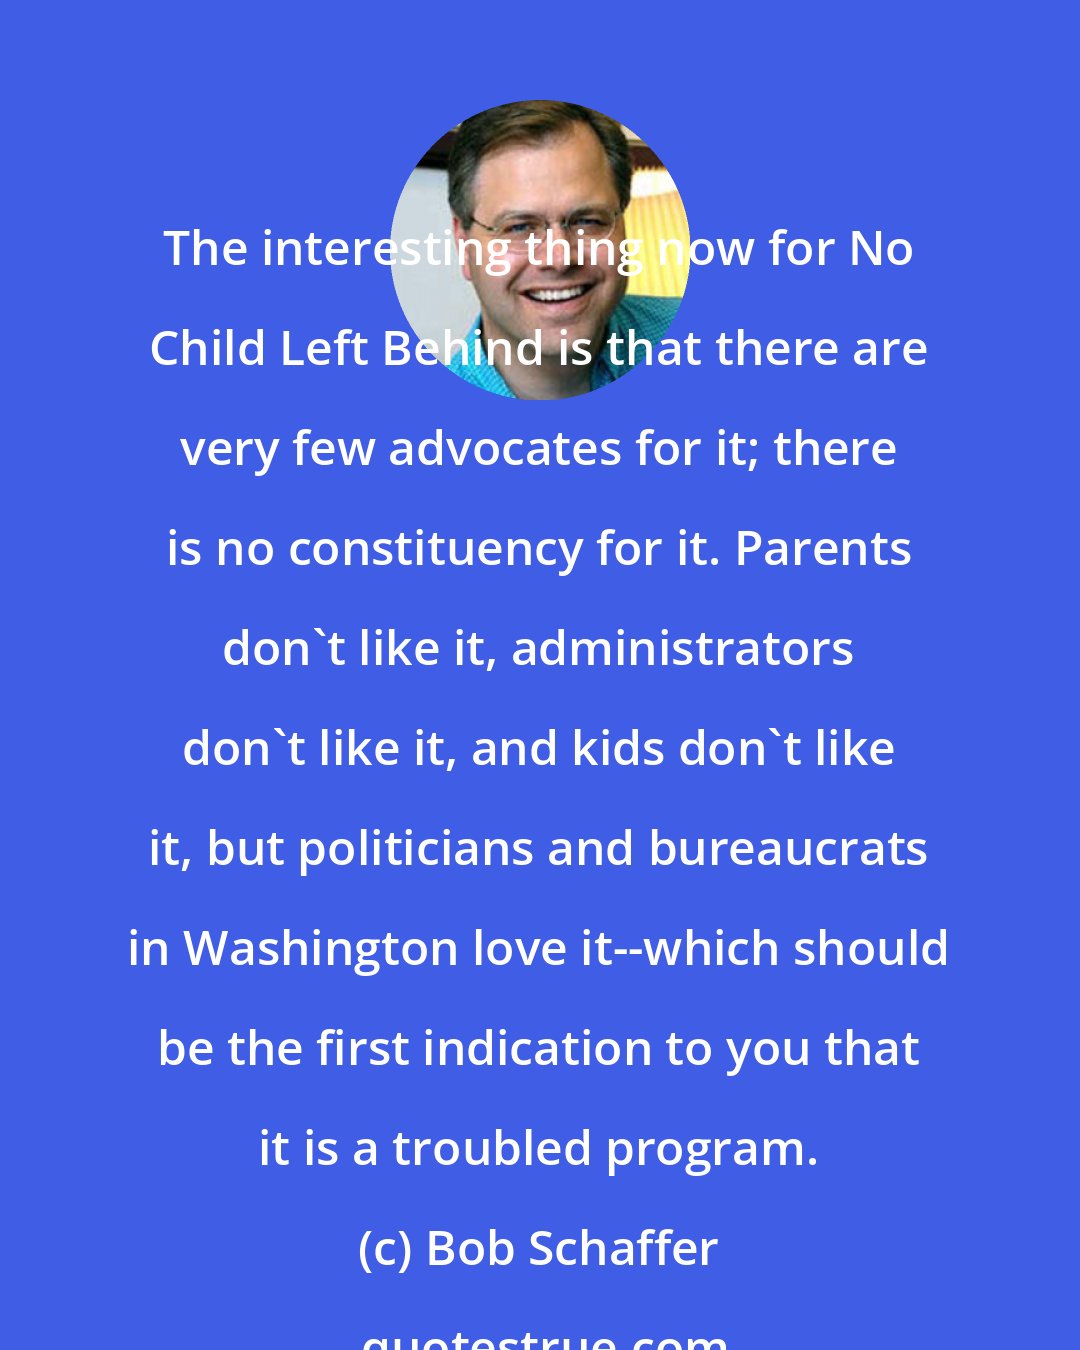 Bob Schaffer: The interesting thing now for No Child Left Behind is that there are very few advocates for it; there is no constituency for it. Parents don't like it, administrators don't like it, and kids don't like it, but politicians and bureaucrats in Washington love it--which should be the first indication to you that it is a troubled program.